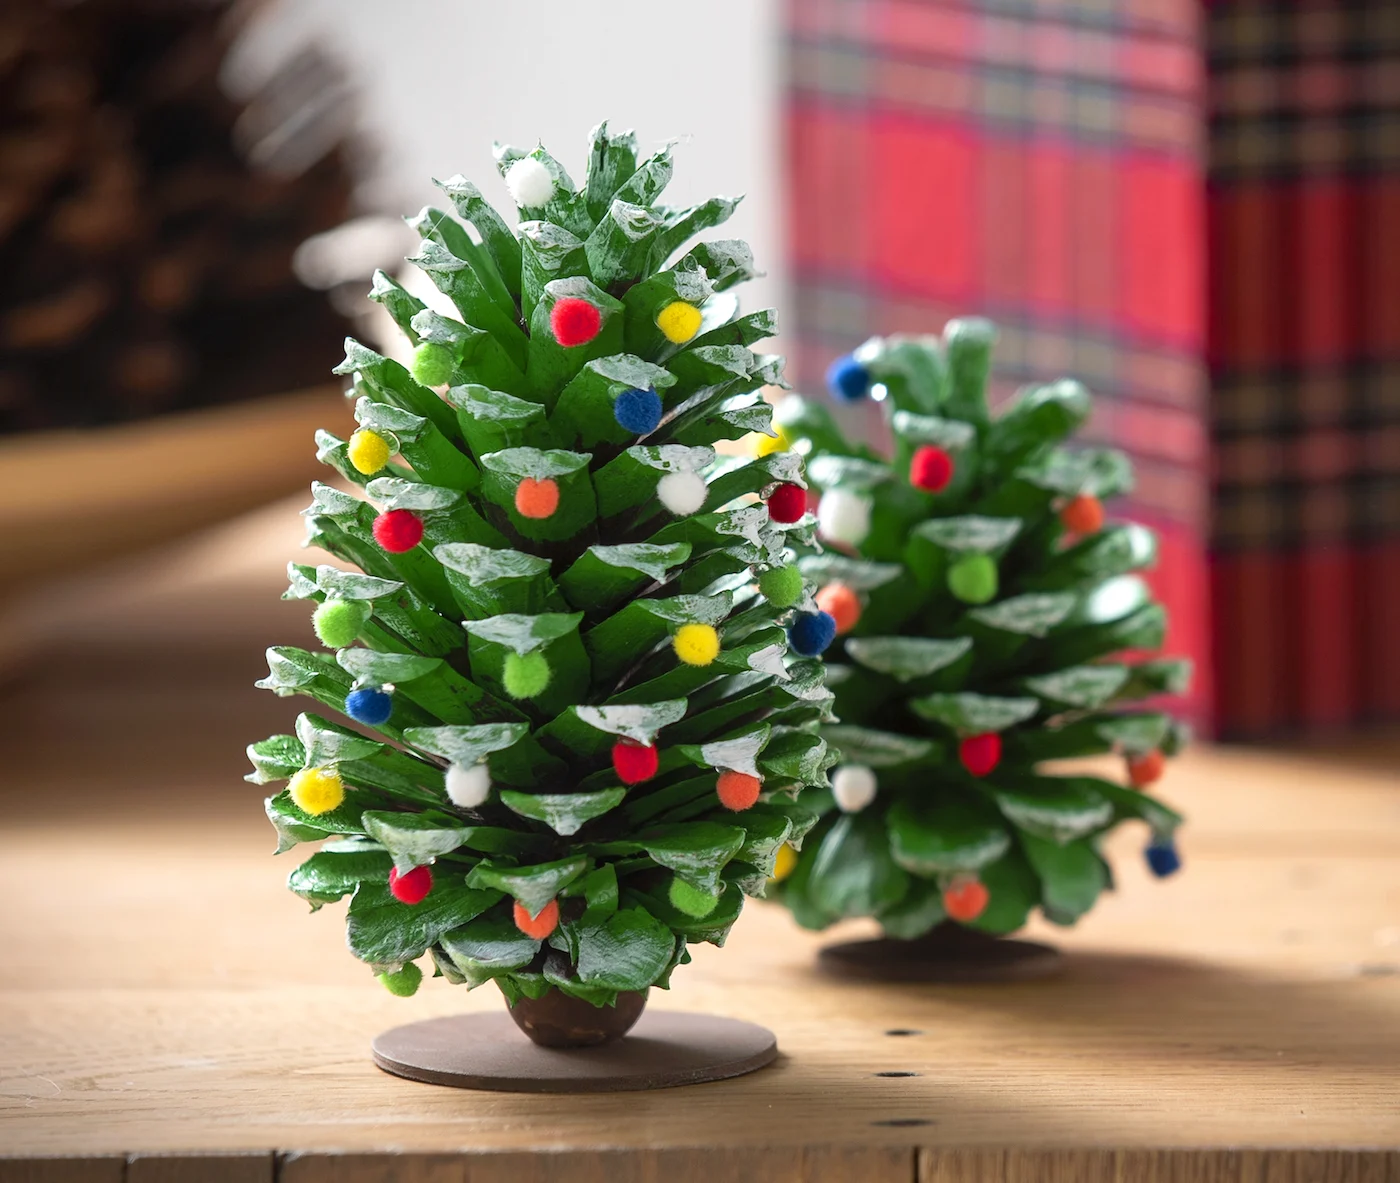 How to Make Pine Cone Ornaments